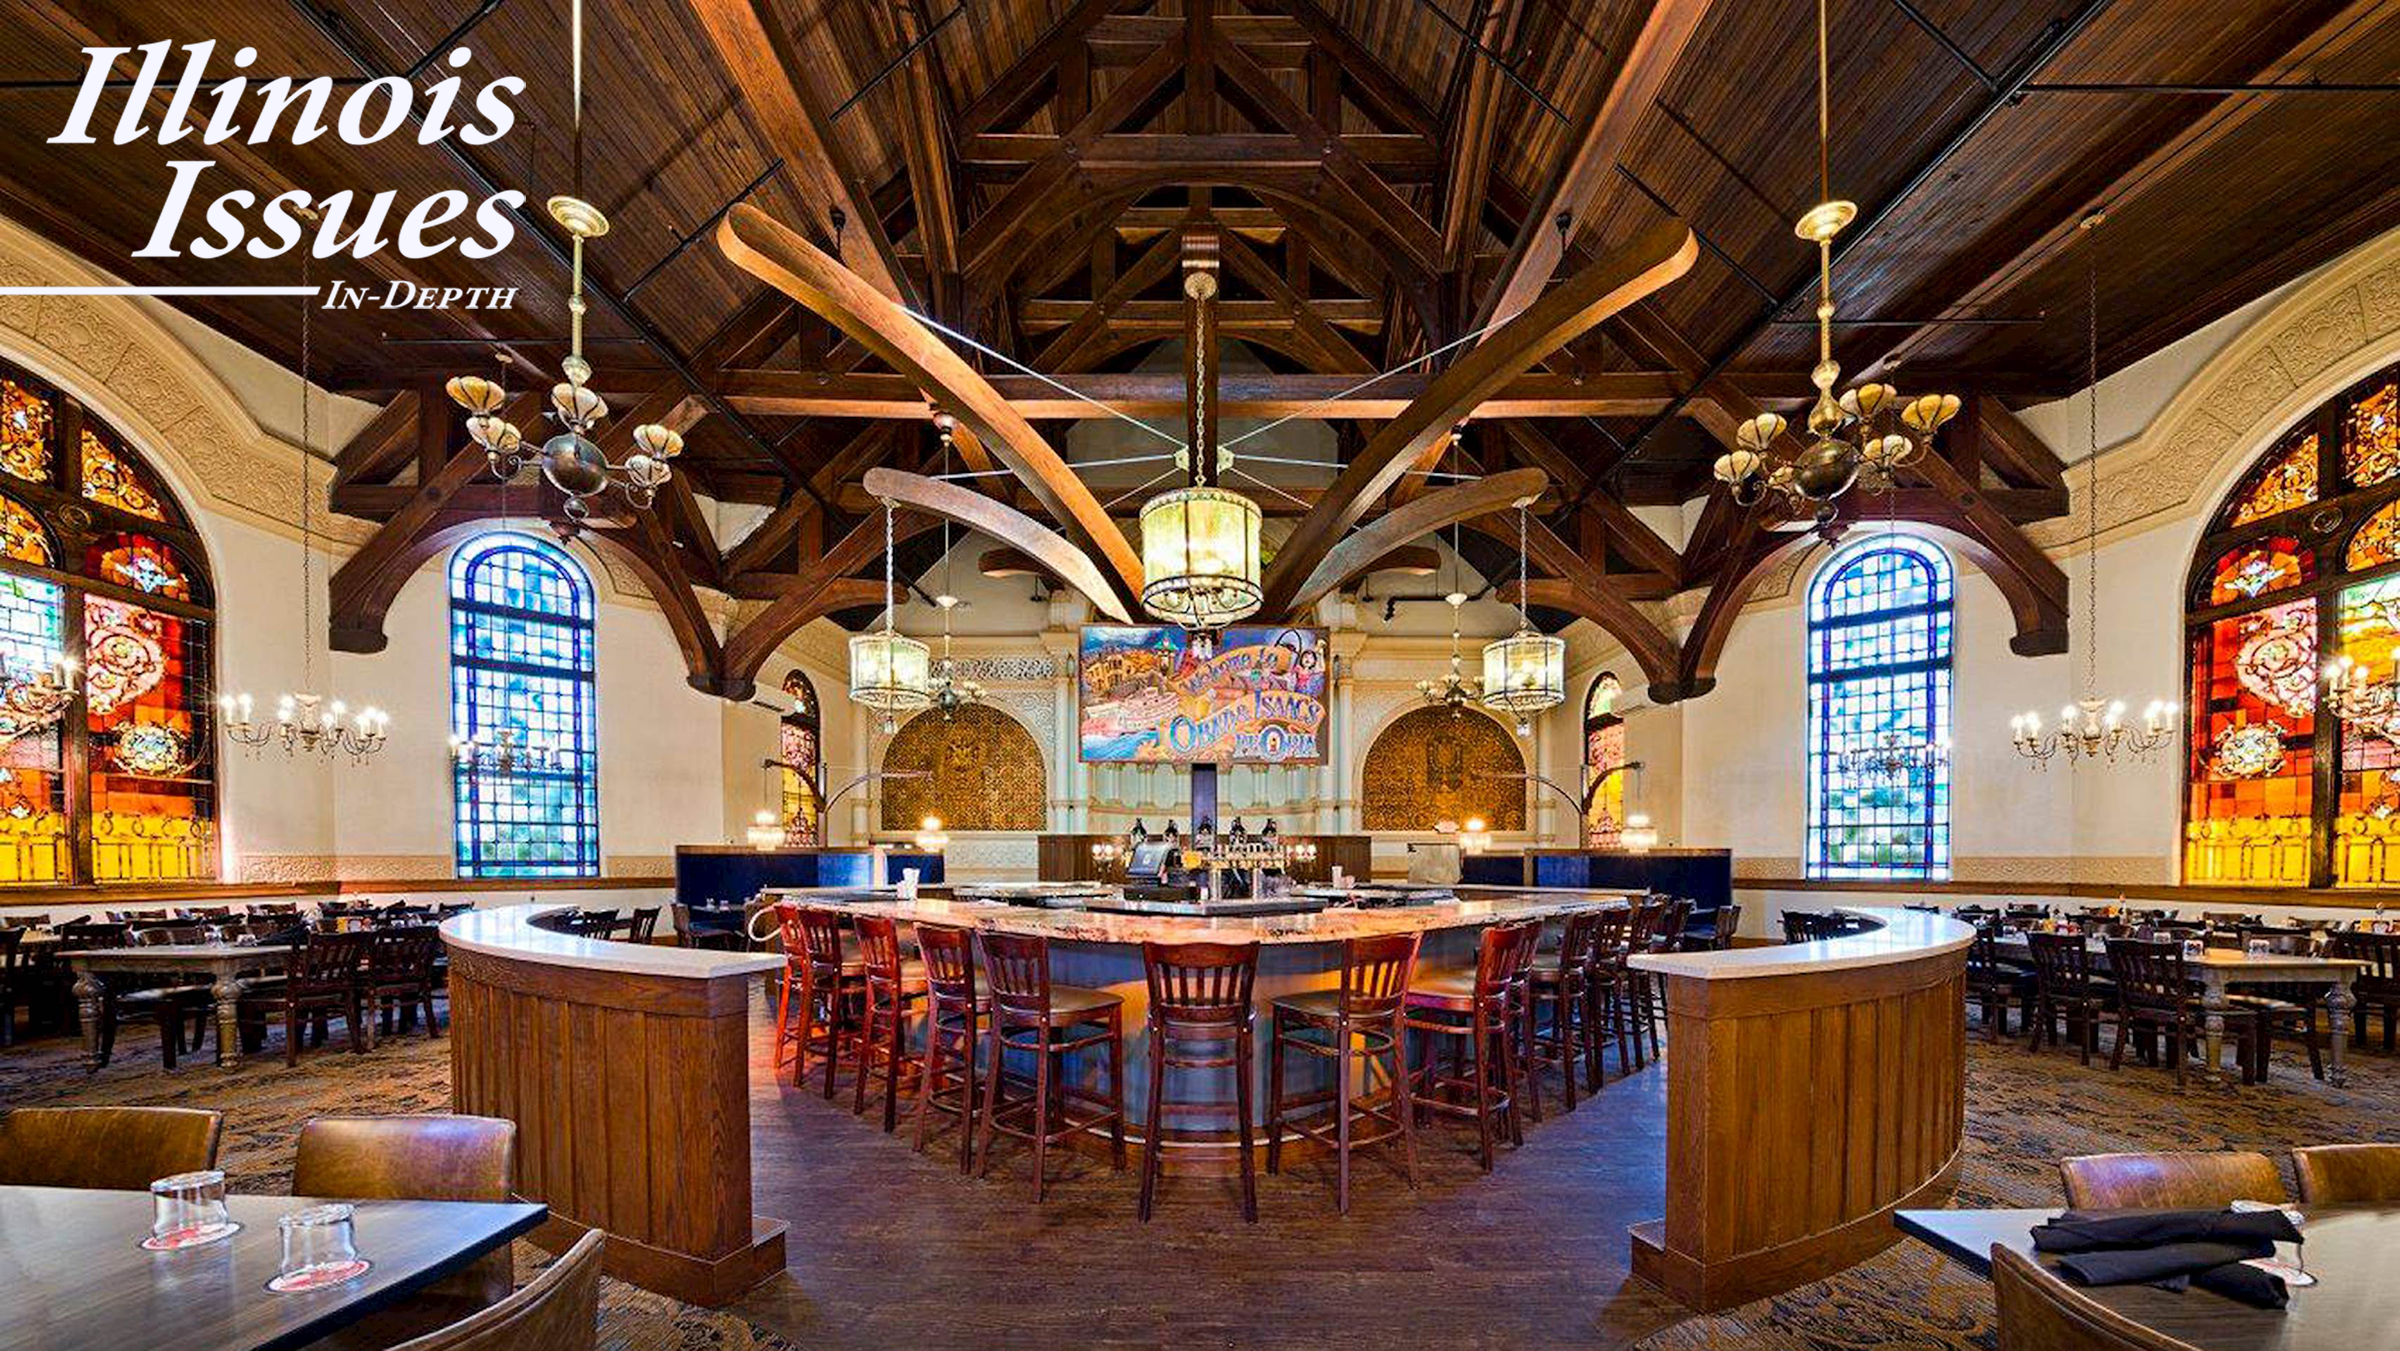 The interior of Obed and Issac's Peoria, a restaurant built inside a converted Presbyterian church